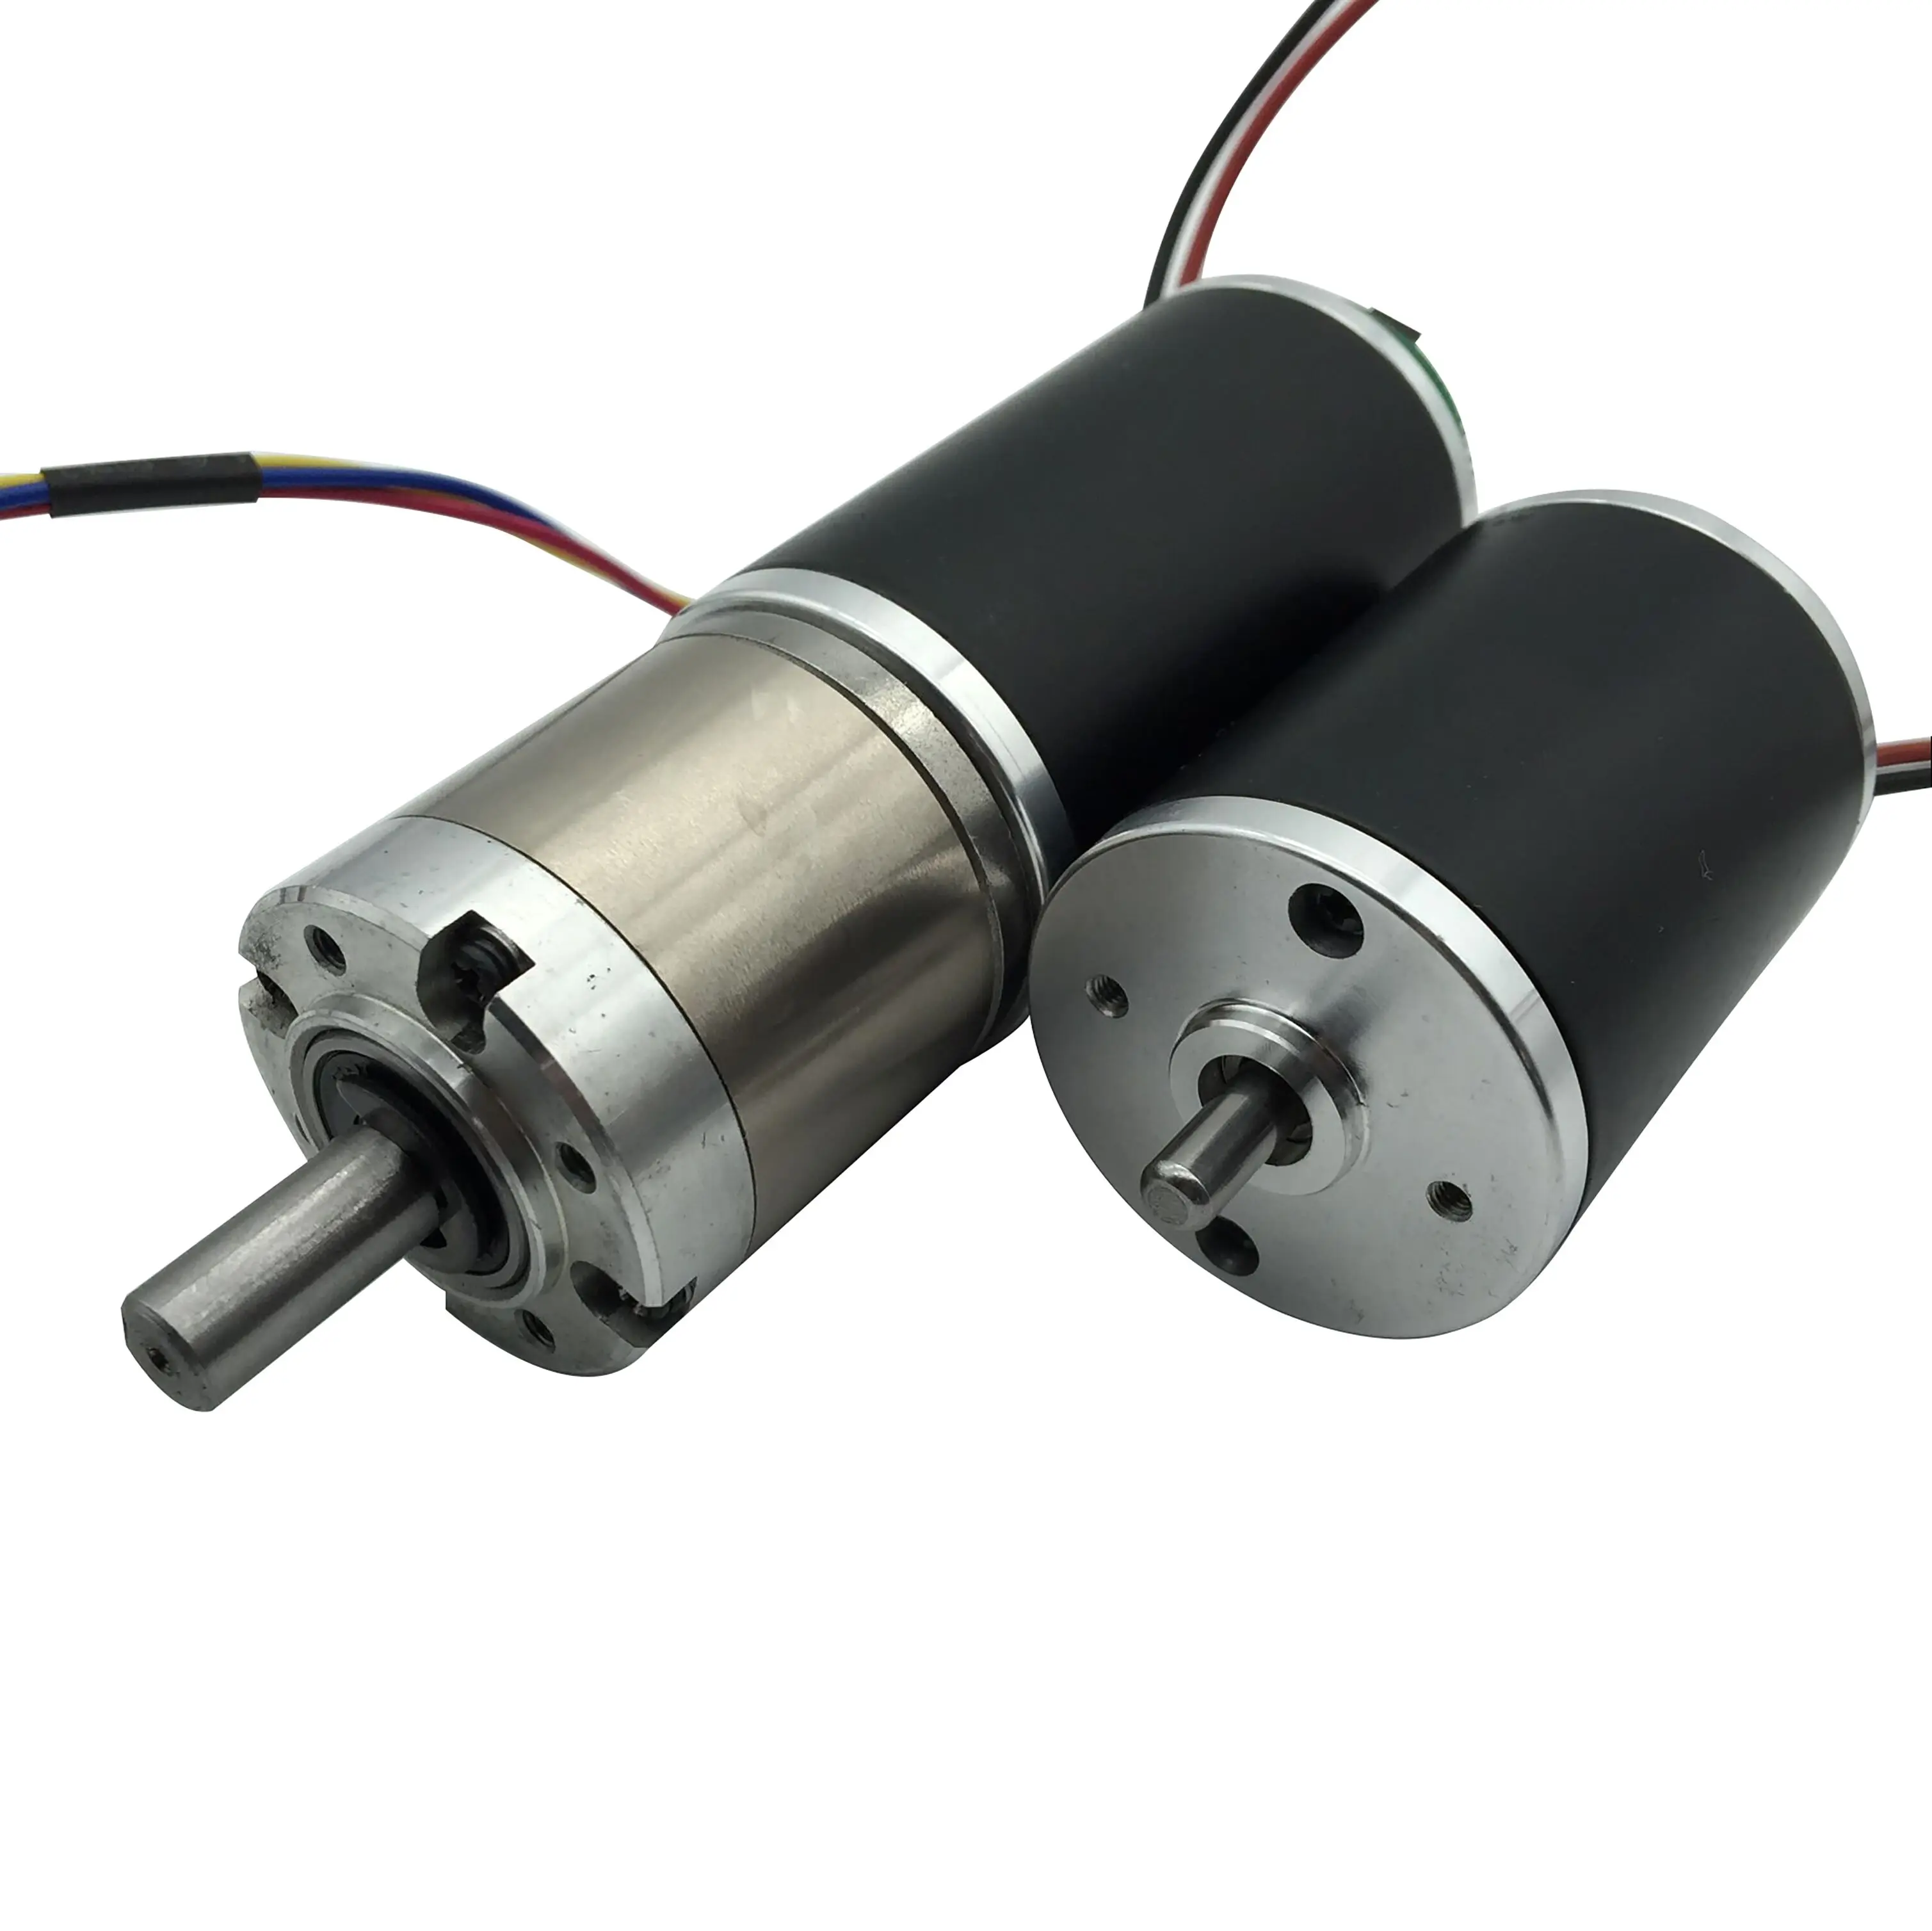 38mm Sintered NdFeB Magnet Brushed DC Micro Motor 12v 24v, with Small Size Rare Earth Magnet Big Torque